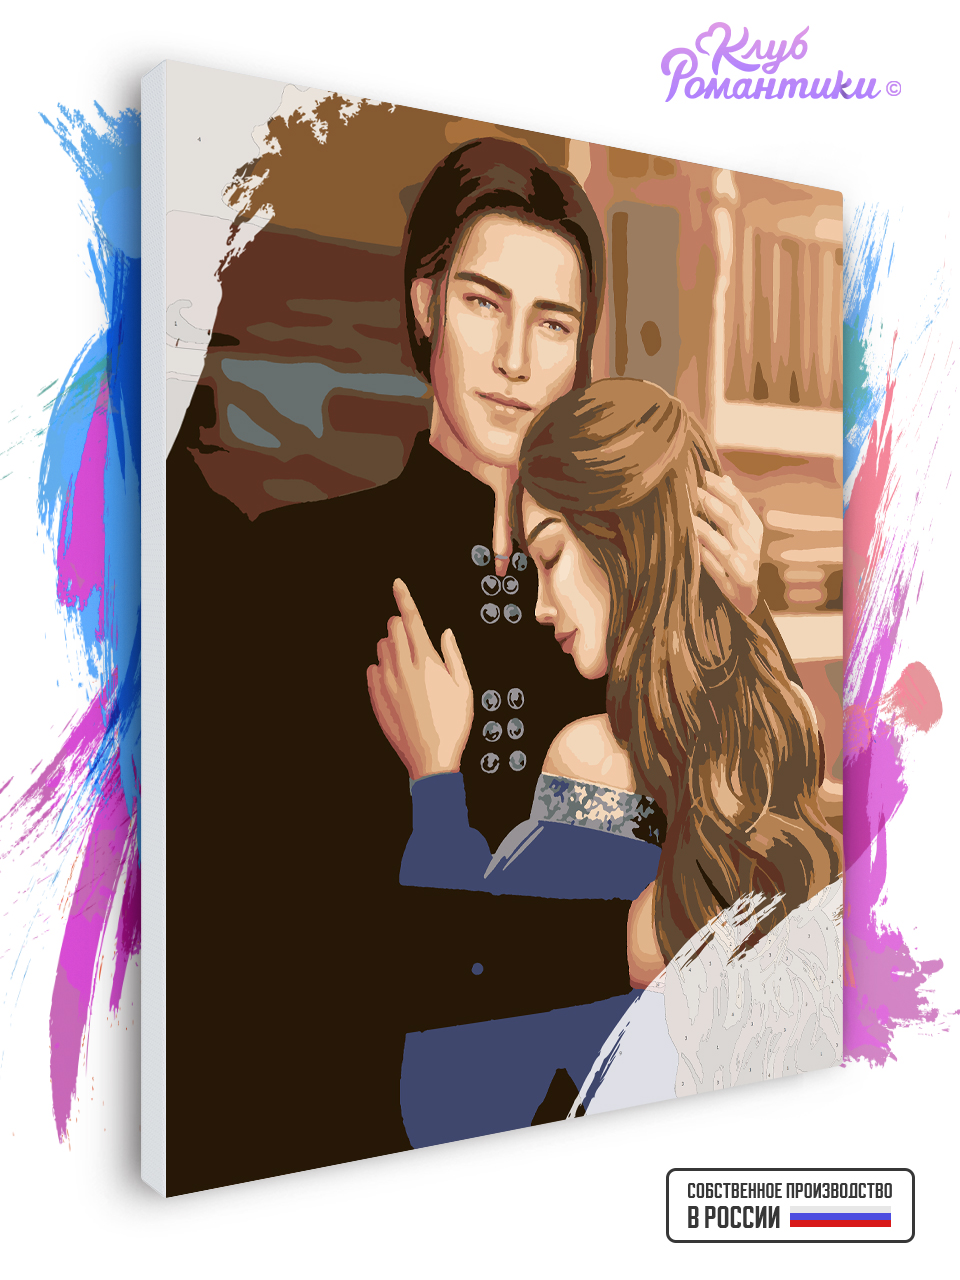 Laya and Vlad Picture by numbers Dracula Love Story Romance Club